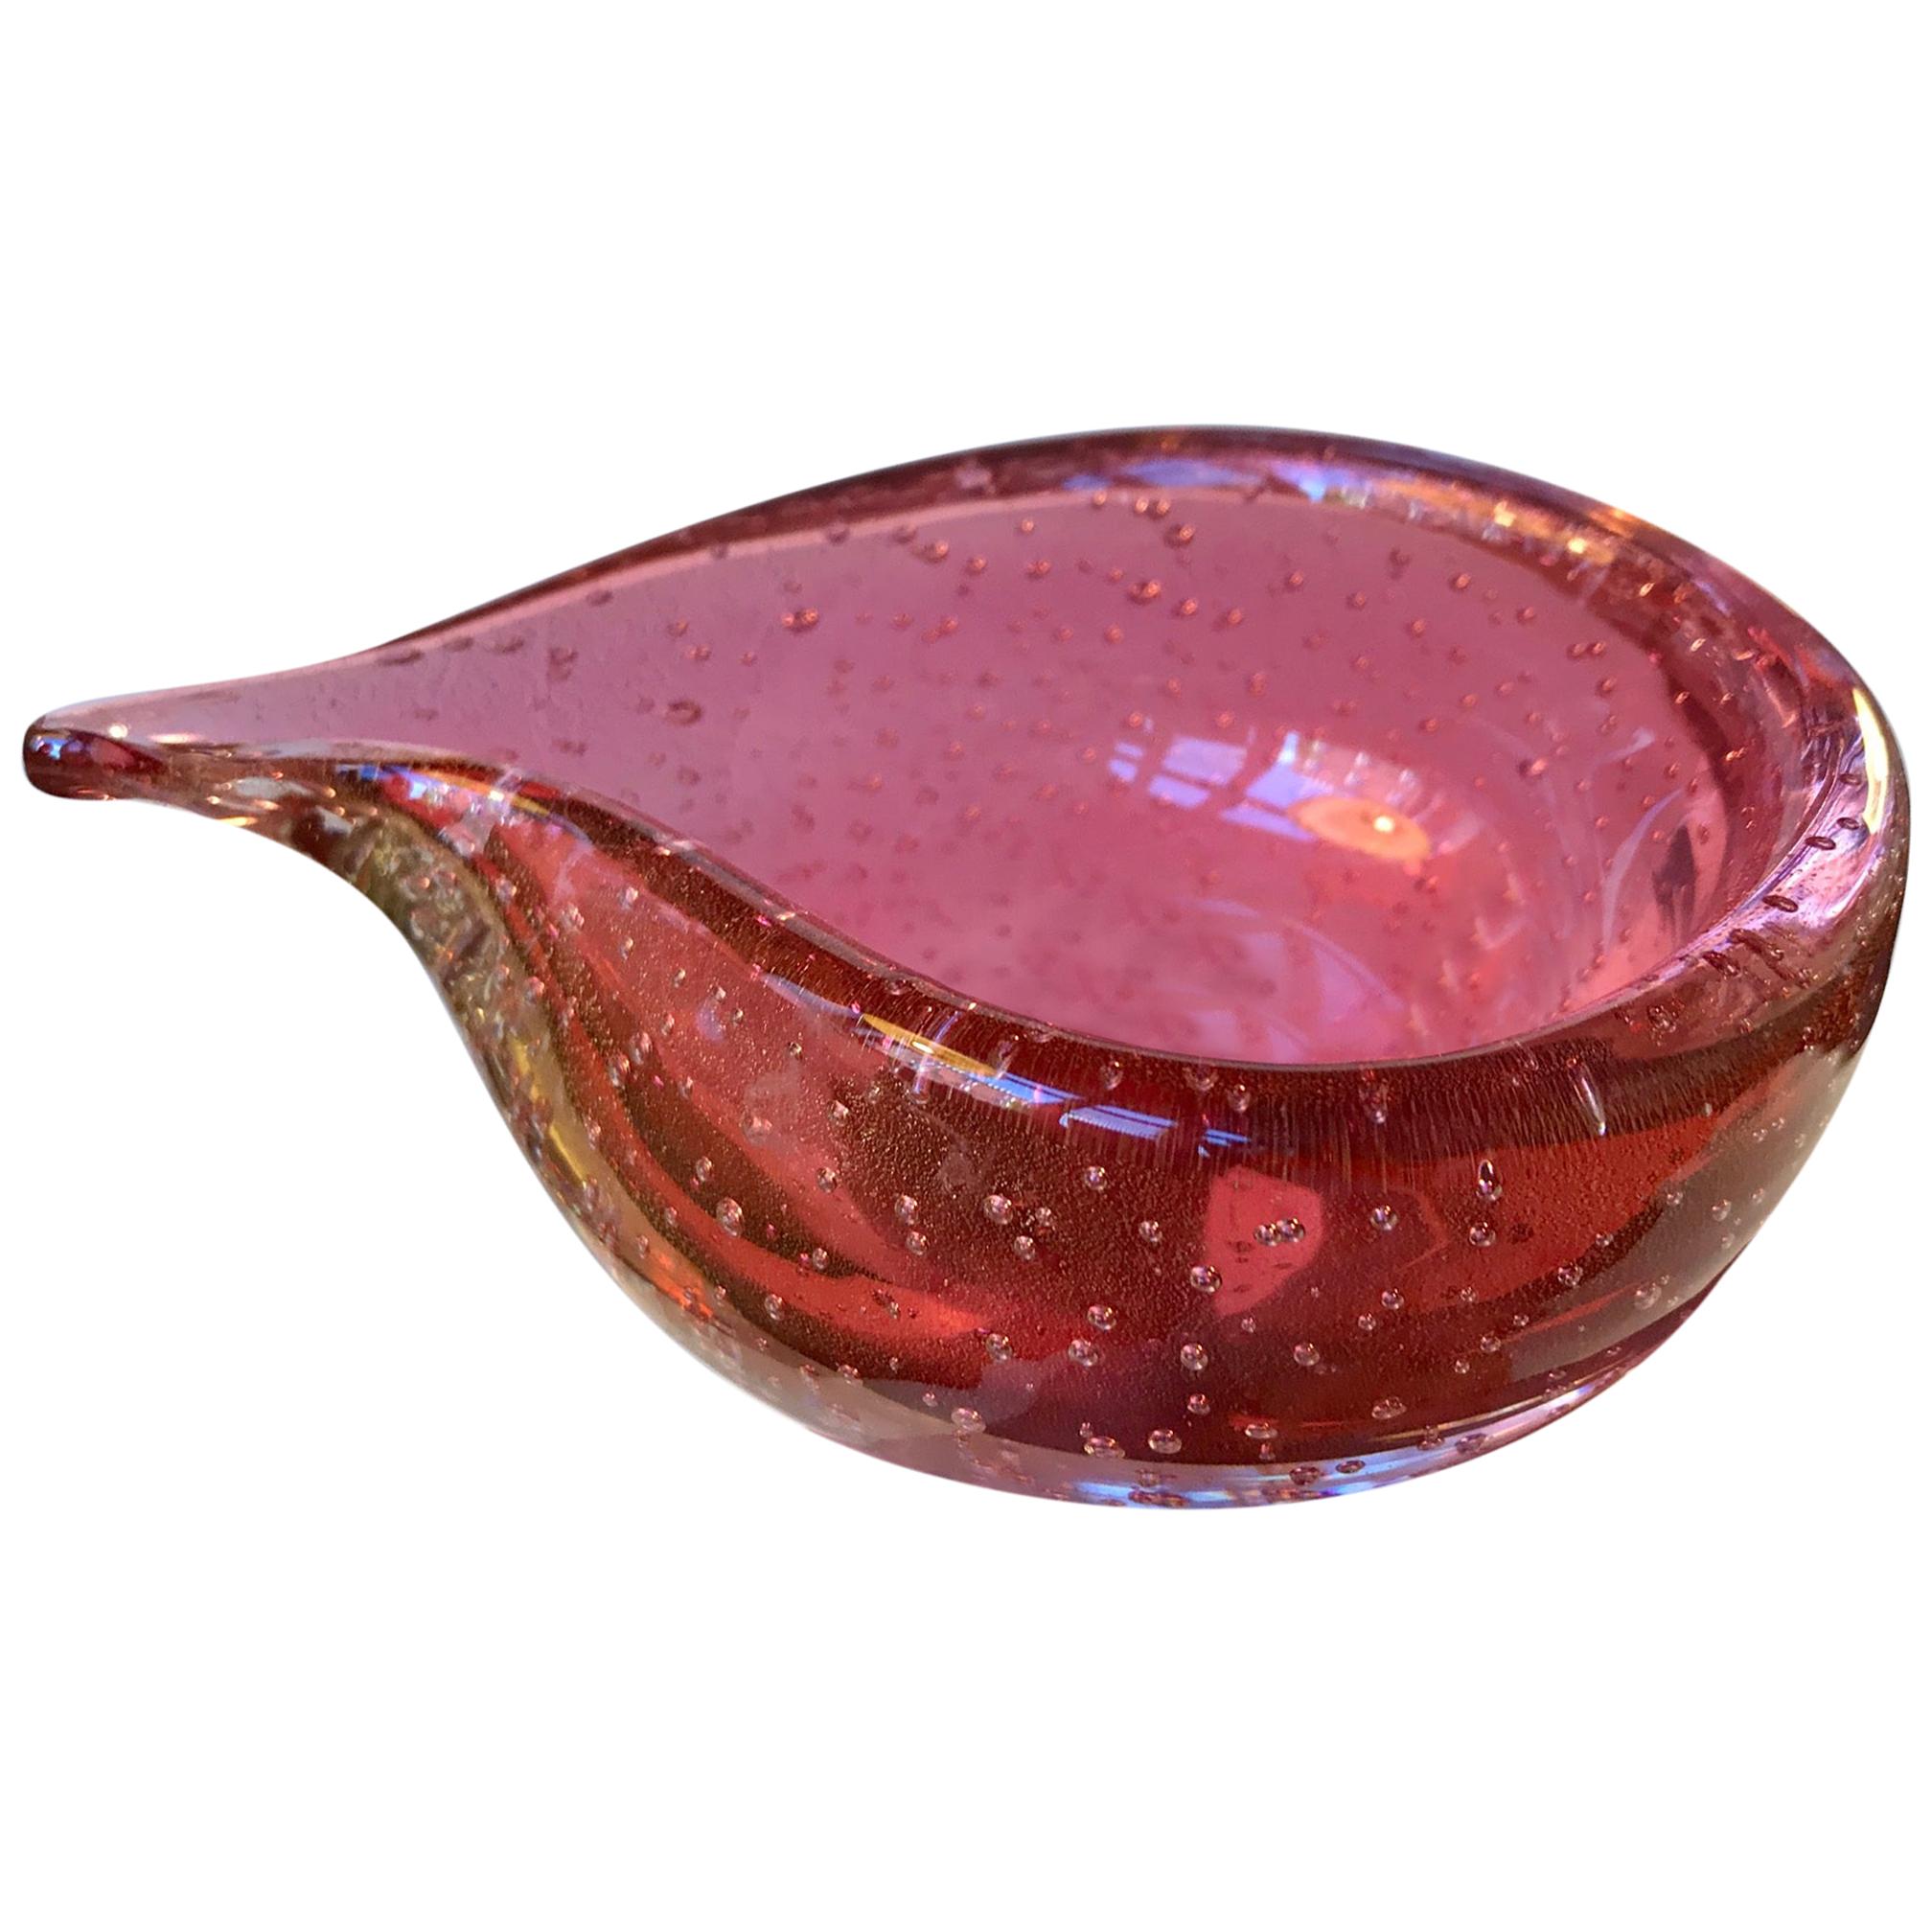 Pink Seguso Murano Ashtray with Gold Dust, 1960s For Sale